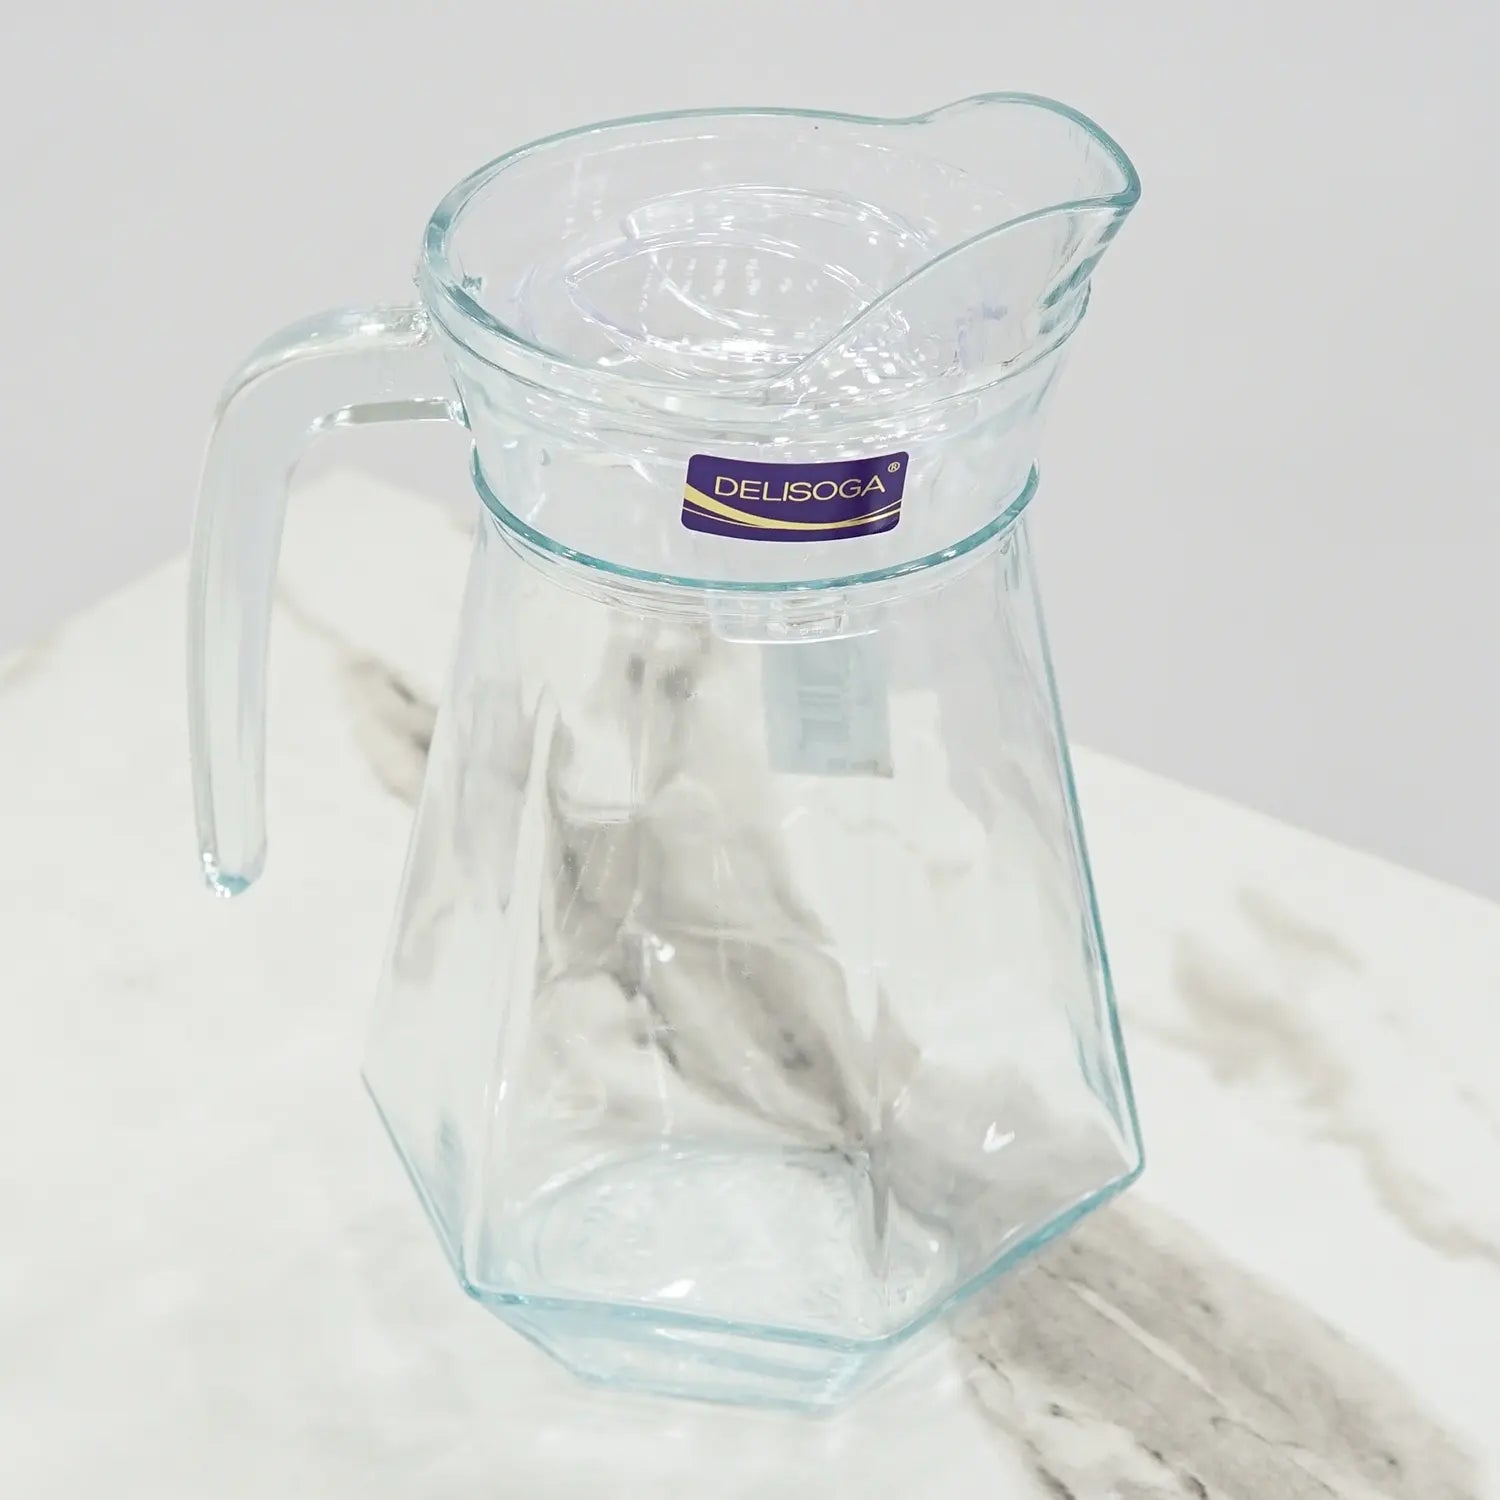 Purity in Pour: High-Quality Water Jug for Refreshing Hydration